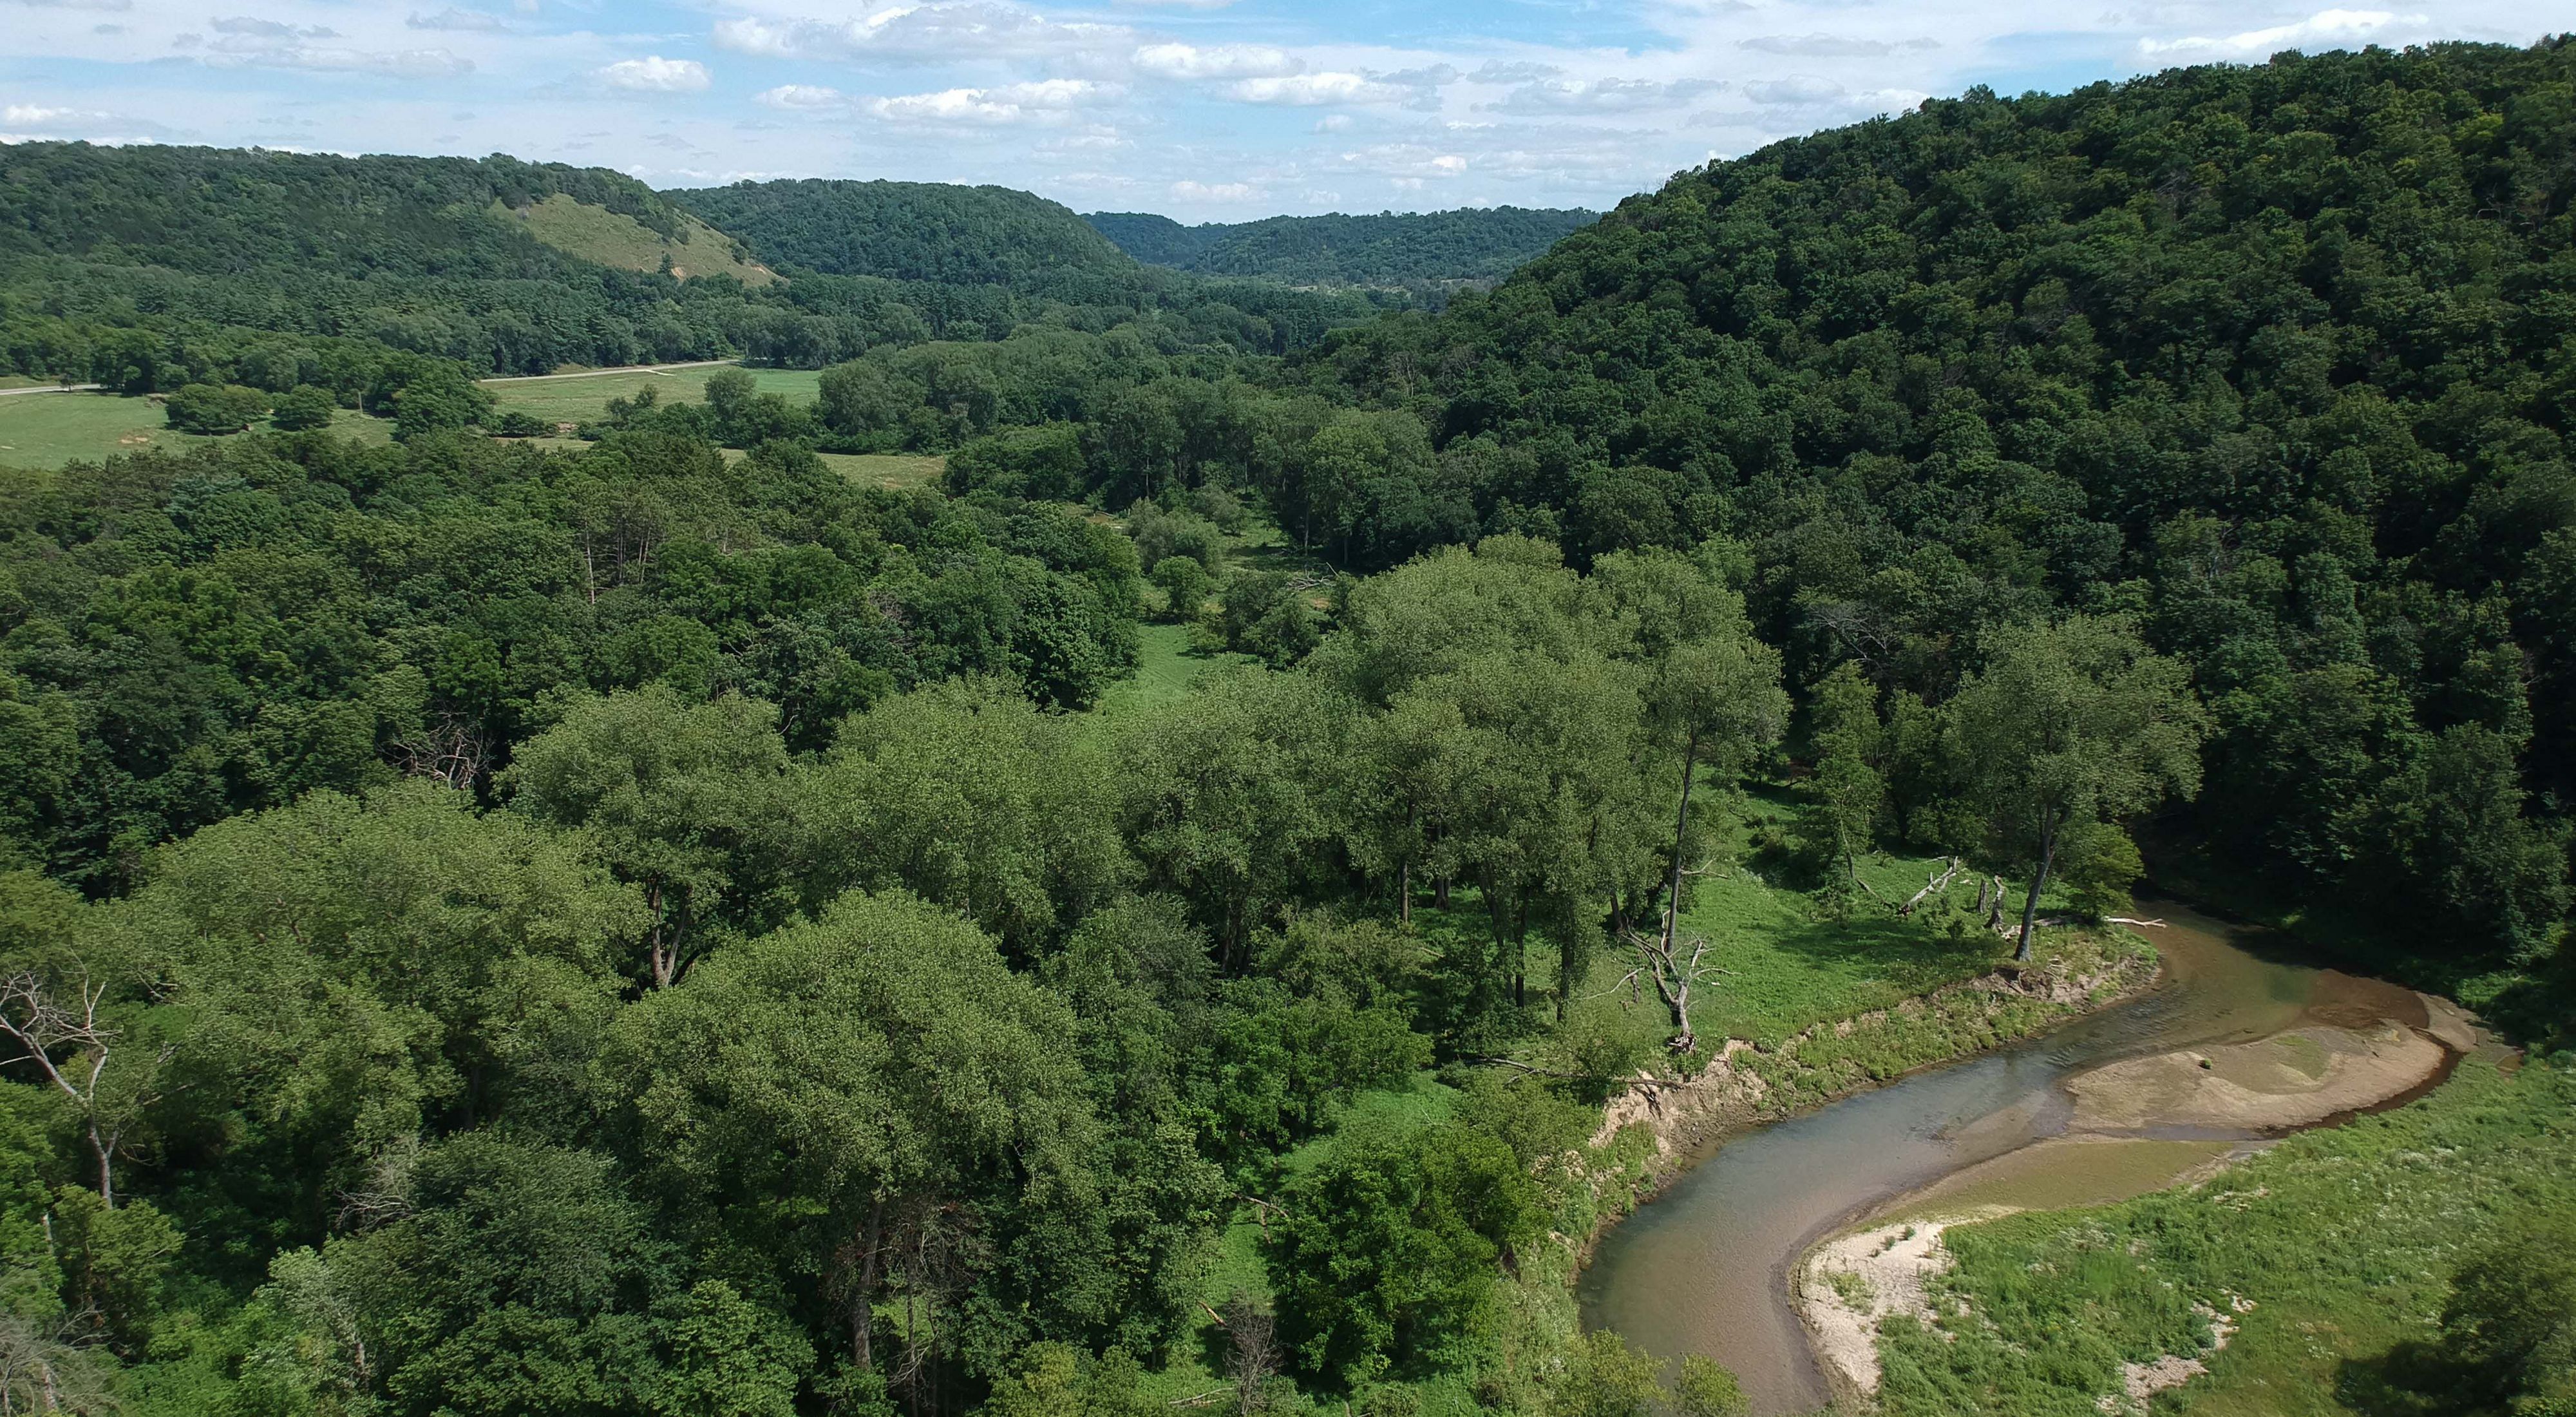 River winding through a forest with patches of open grassland in Minnesota’s driftless area.